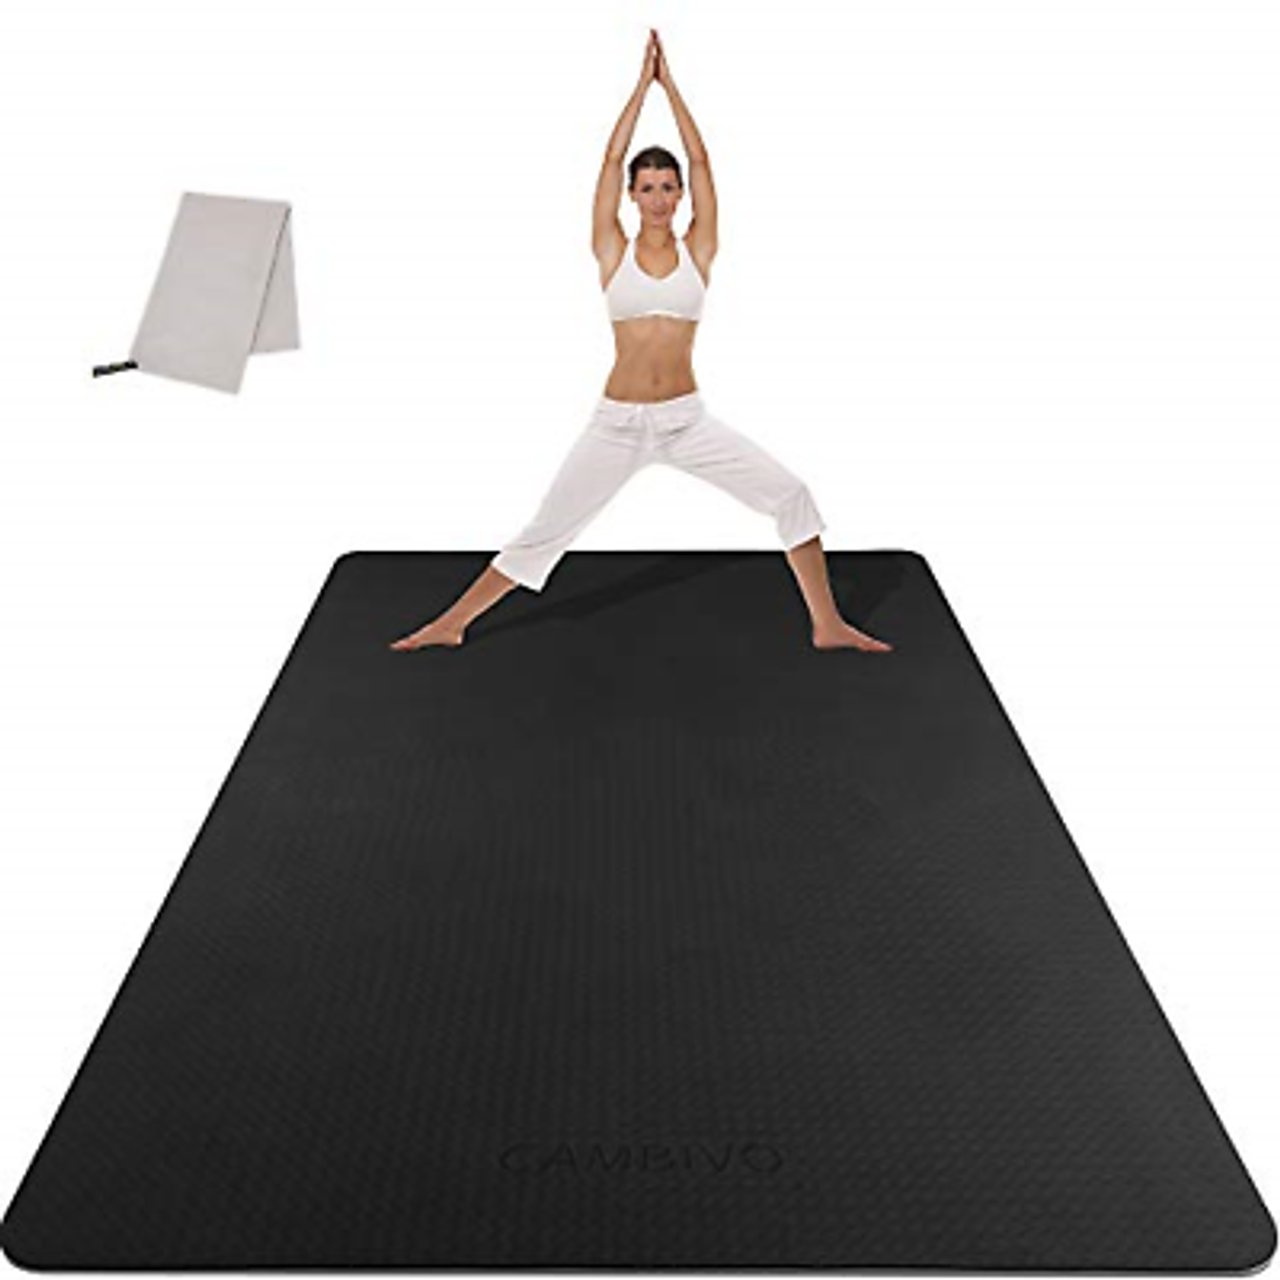  CAMBIVO Large Yoga Mat (6'x 4'), Extra Wide Workout Mat for  Men and Women, 1/3 &1/4 Thick Exercise Fitness TPE Mat for Home Gym, Yoga,  Pilates, Workout (Black),6mm : Sports